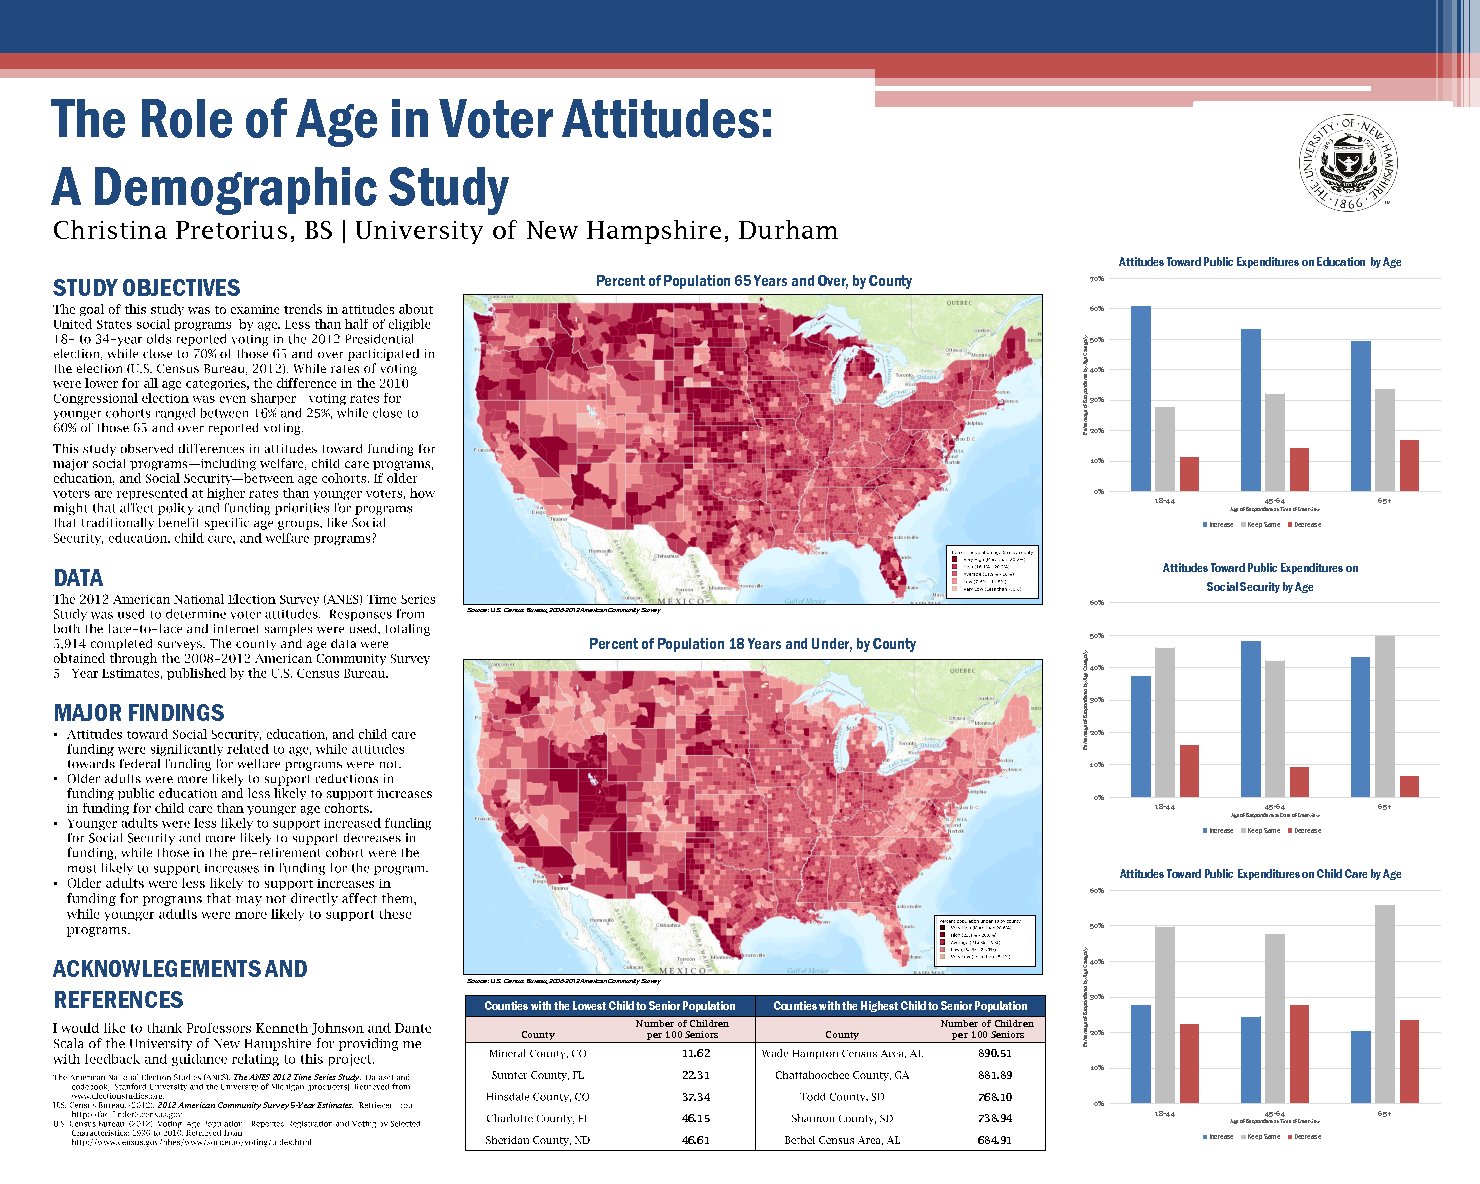 The Role Of Age In Voter Attitudes: A Demographic Study by cmh68